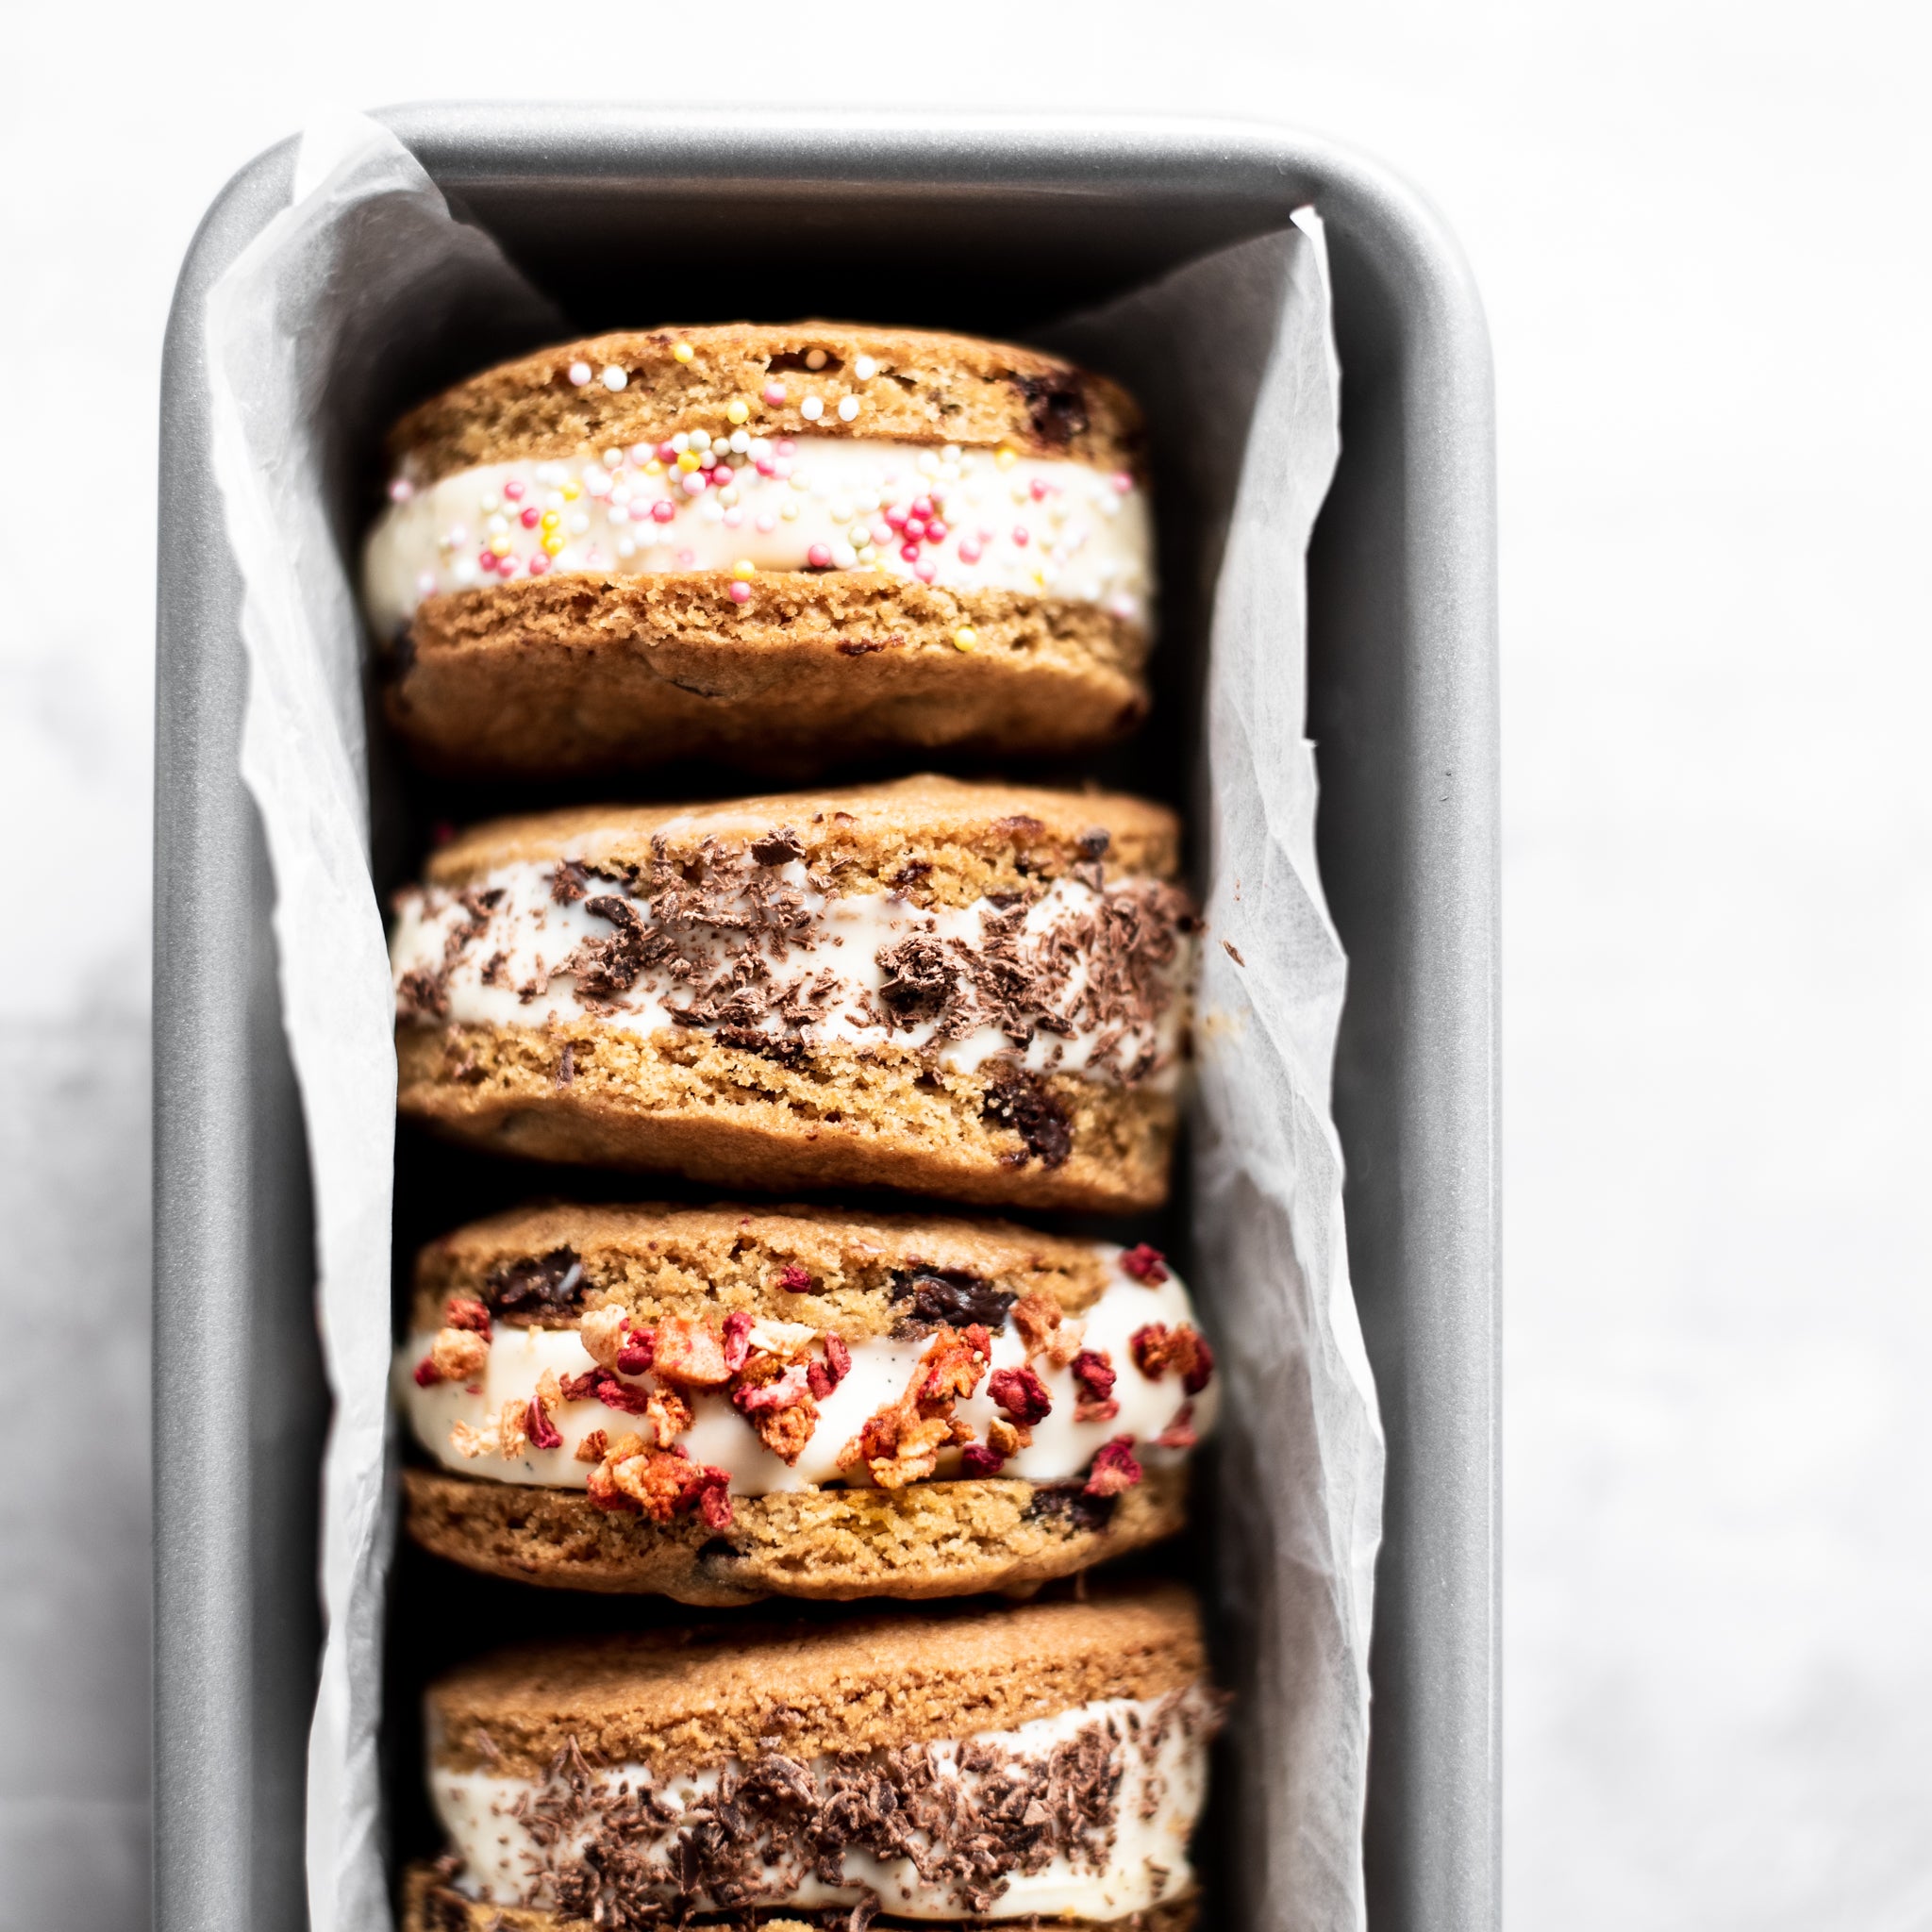 Close-up of four ice cream cookie sandwiches, sprinkled with different toppings